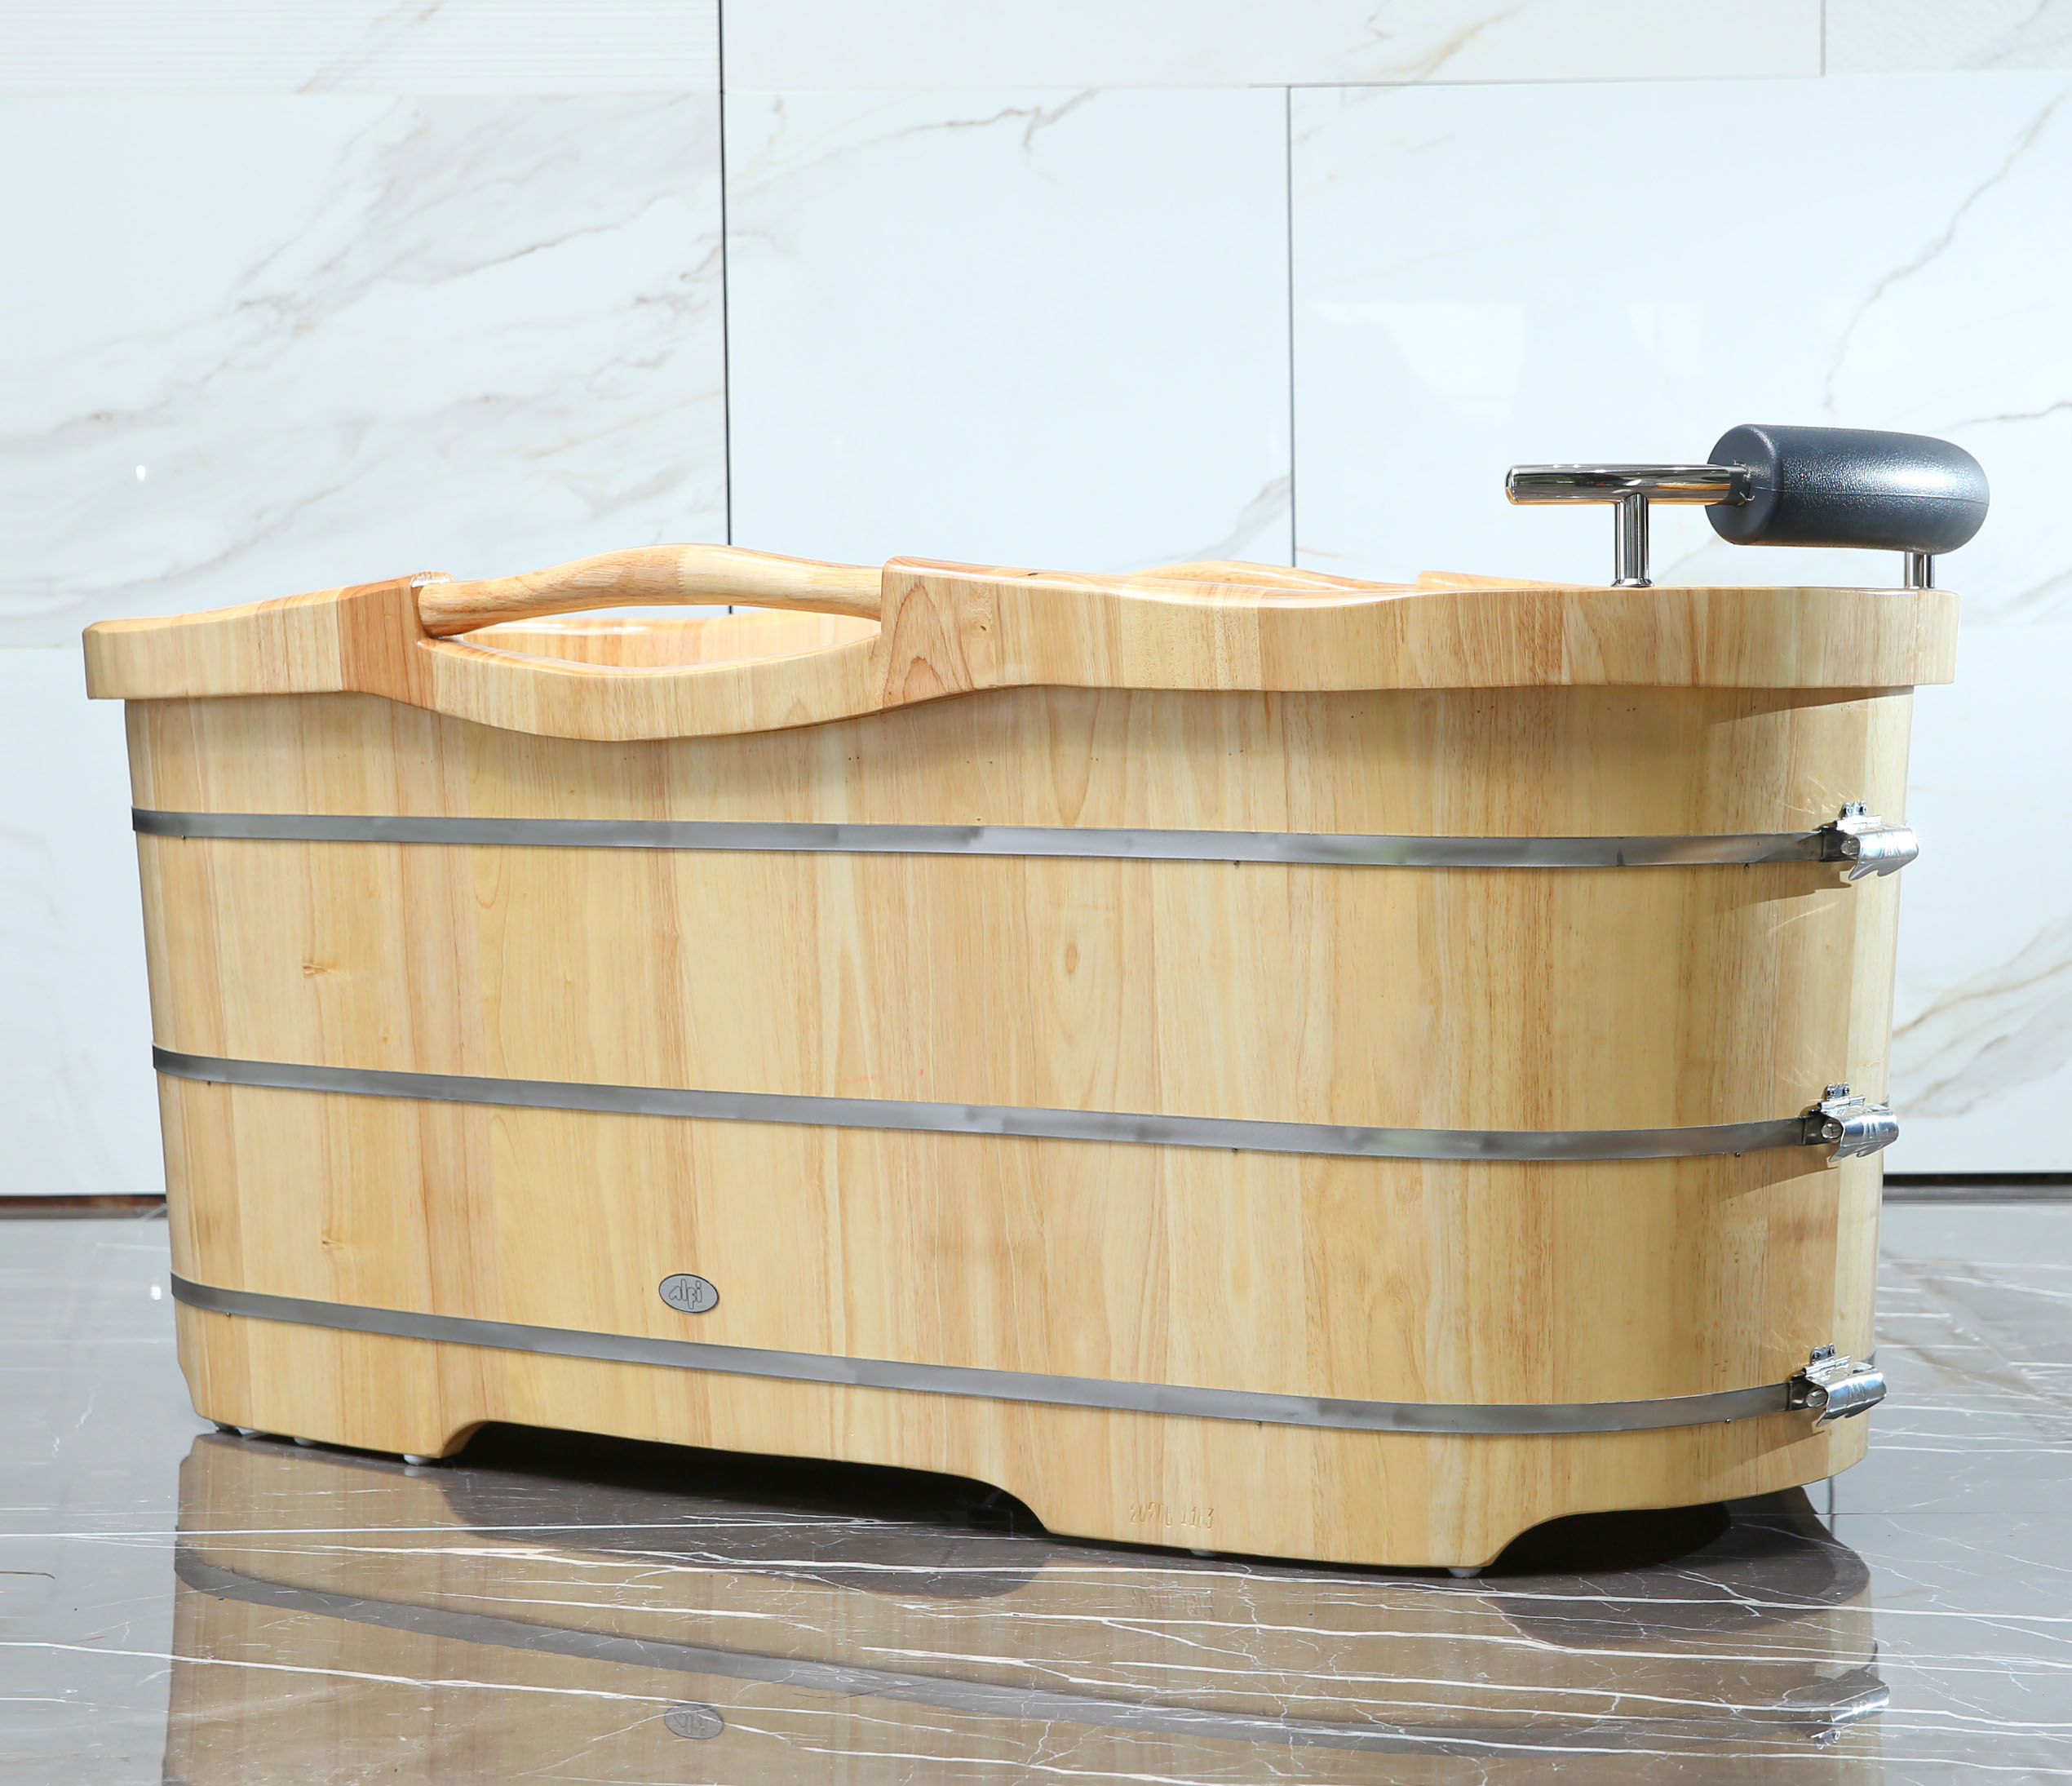 61&apos;&apos; Free Standing Oak Wood Bath With Cusion Headrest - Natural Wood